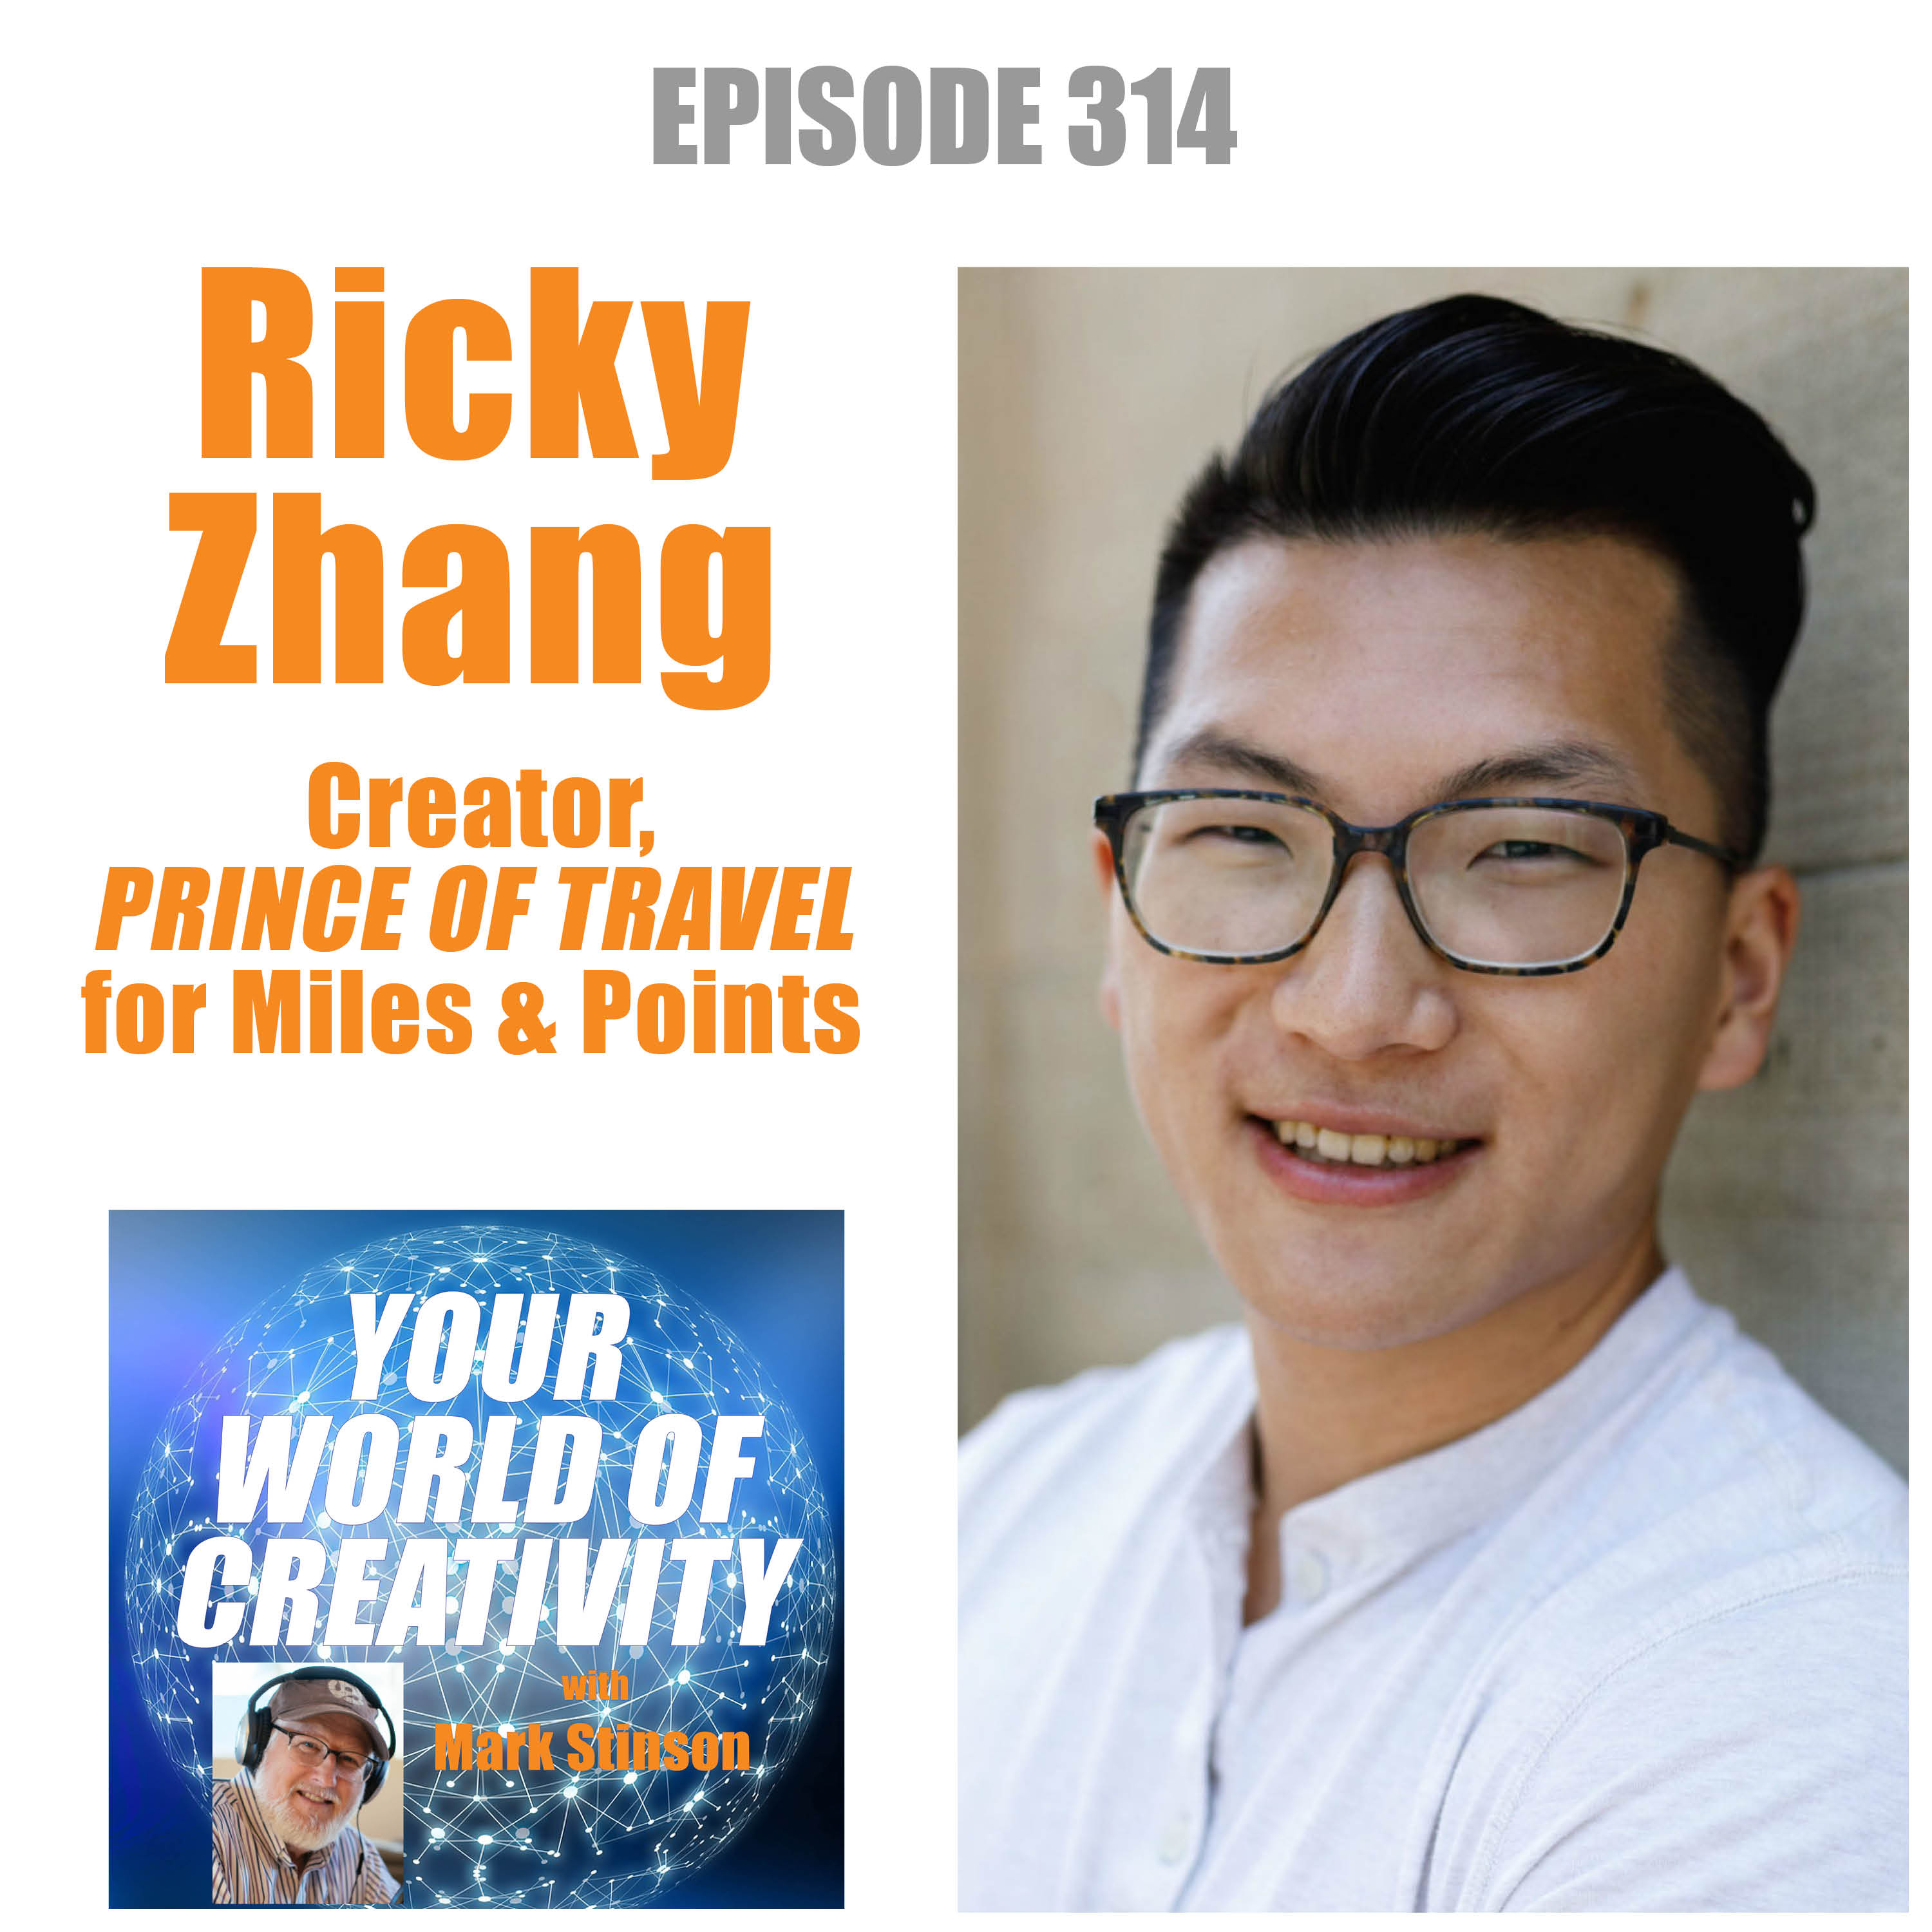 Ricky Zhang, Creator of Prince of Travel for Miles and Points